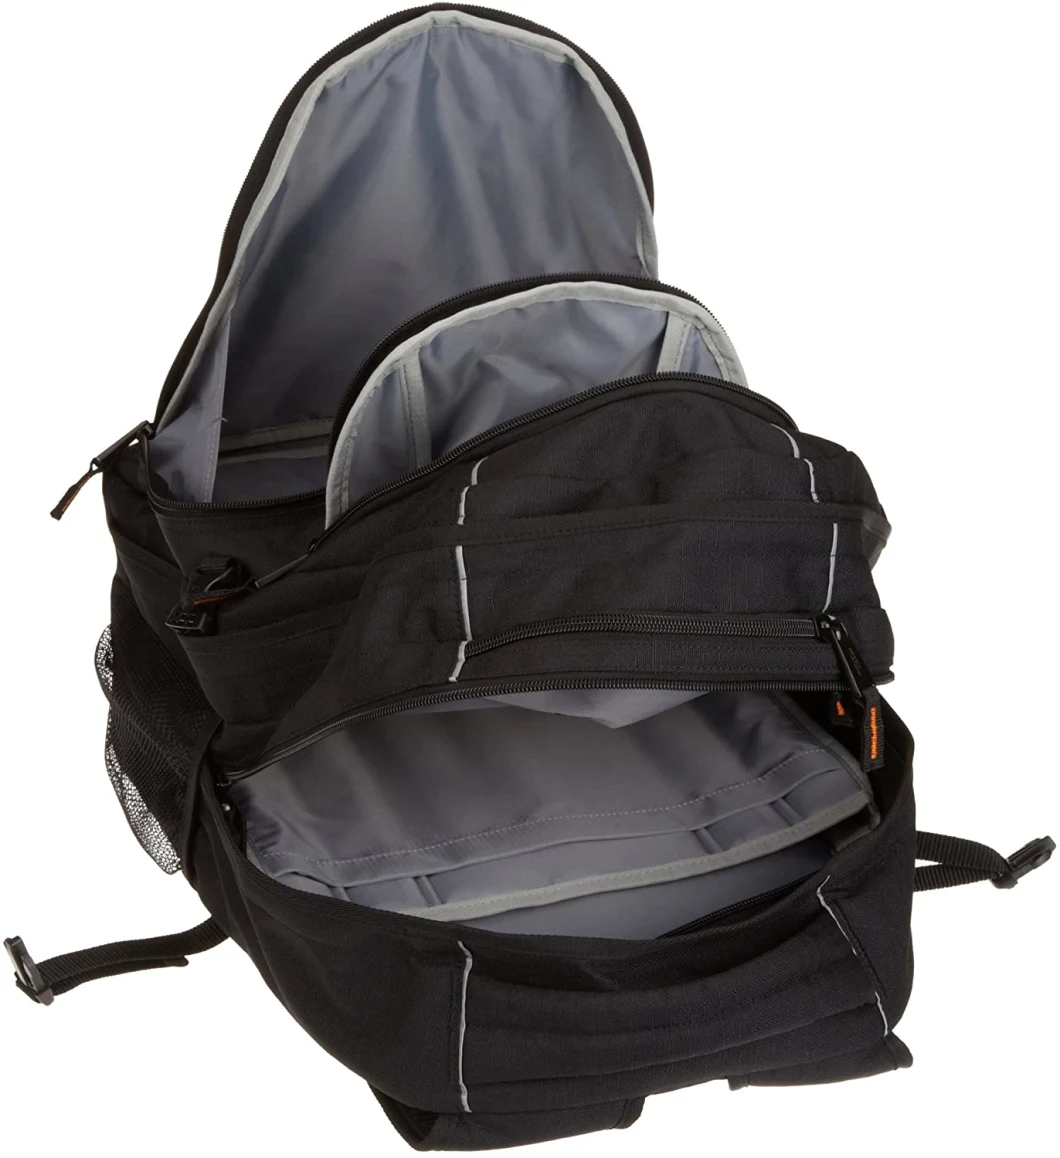 Laptop Backpack Bag - for Maximum 17 Inch Laptop, Used to Ride a Bike, Running, Skiing, Hiking